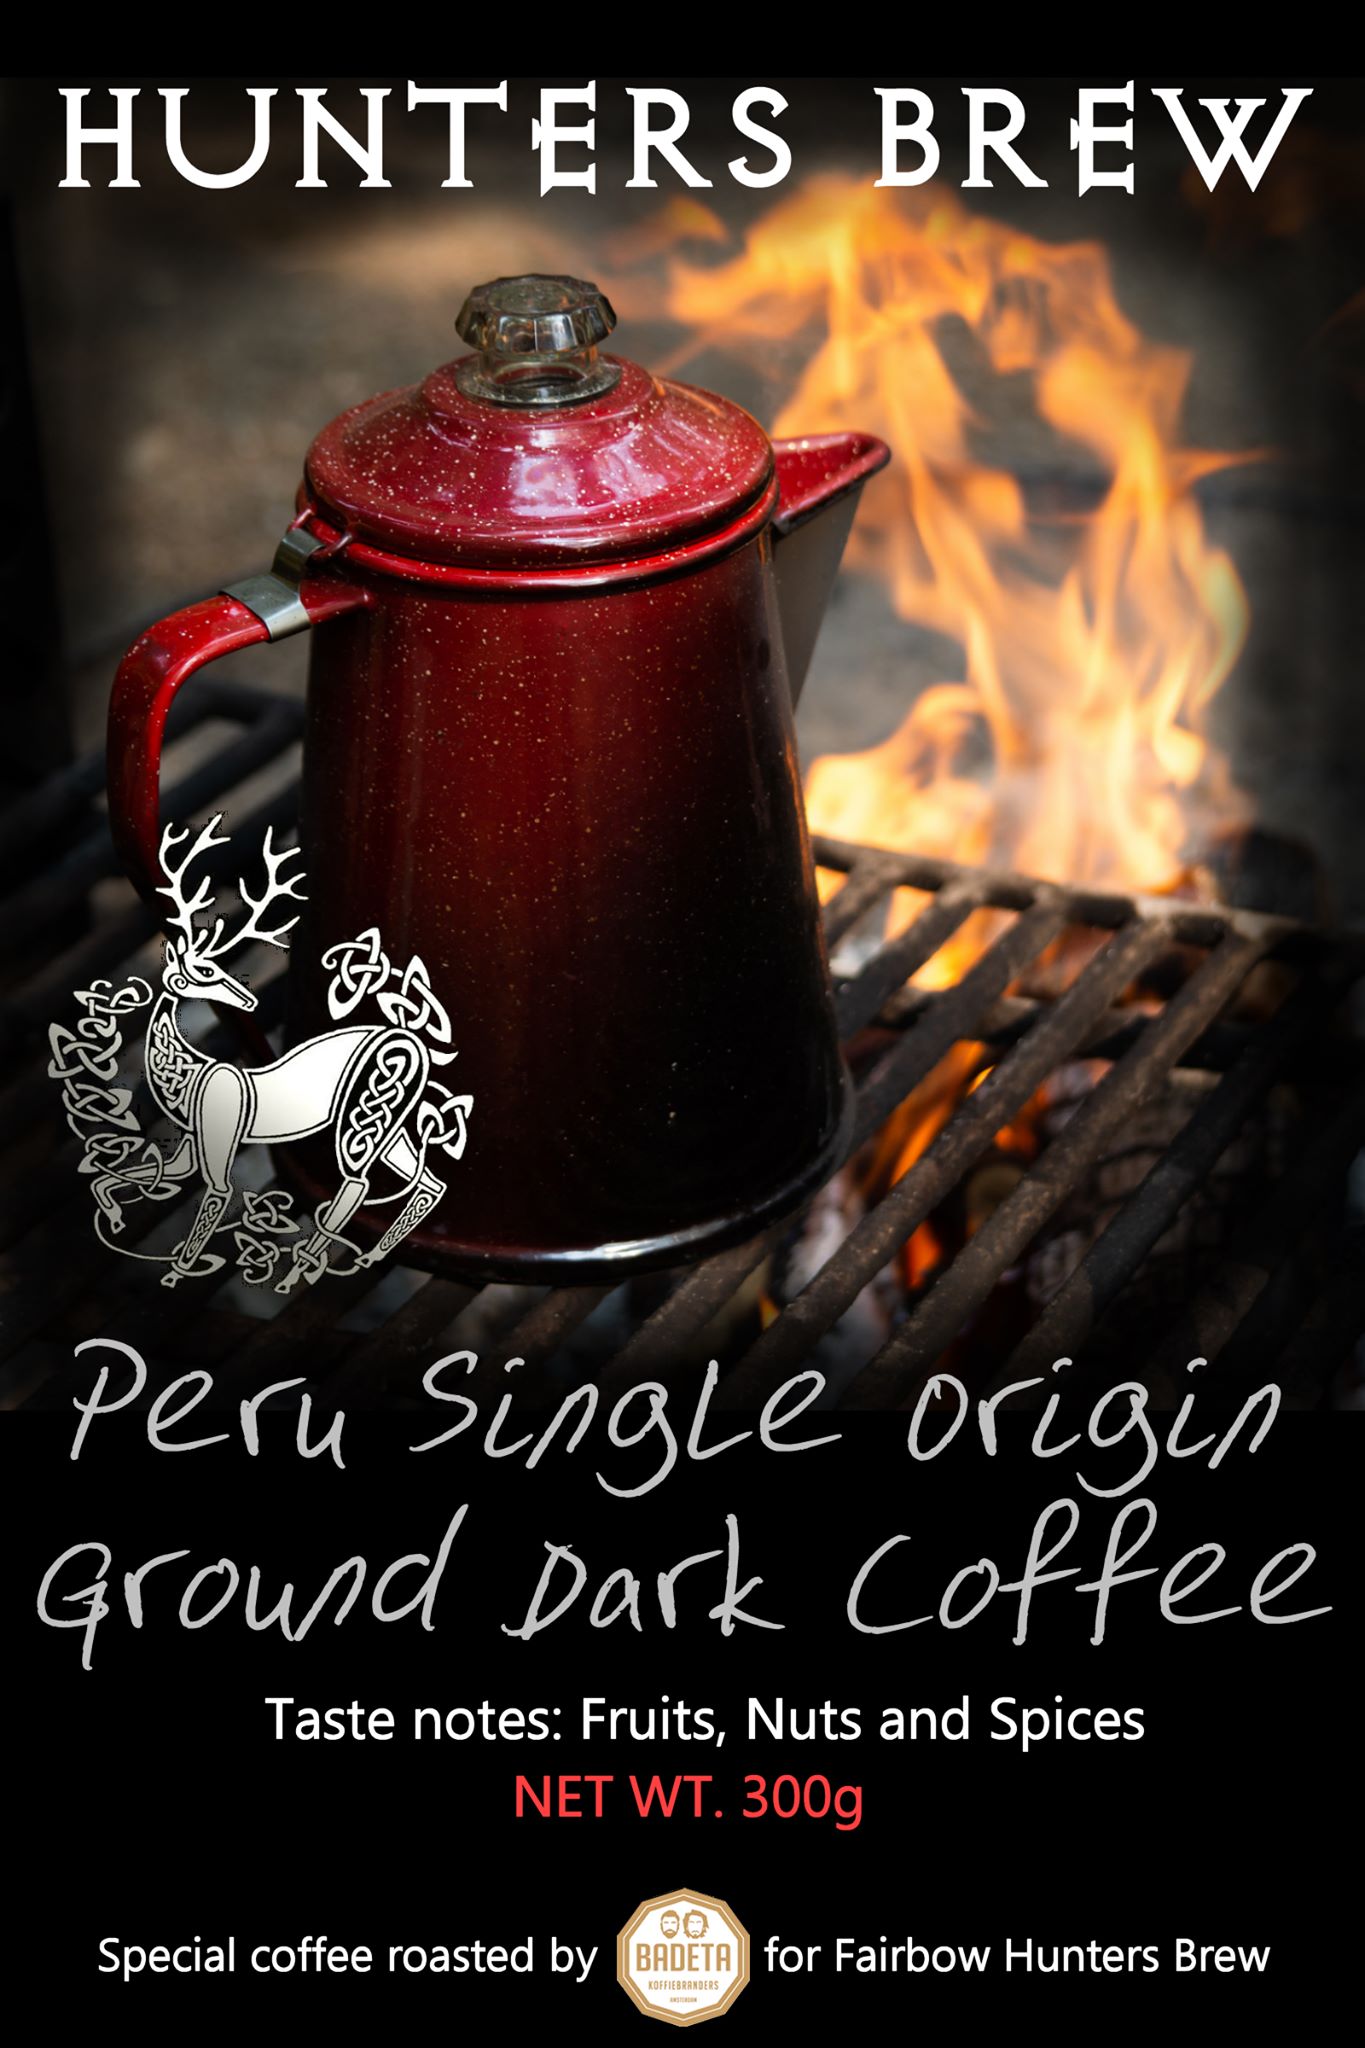 HUNTERS BREW GROUND OR WHOLE BEANS COFFEE SINGLE PERU ORIGIN-Coffee-Fairbow-Whole beans-Fairbow